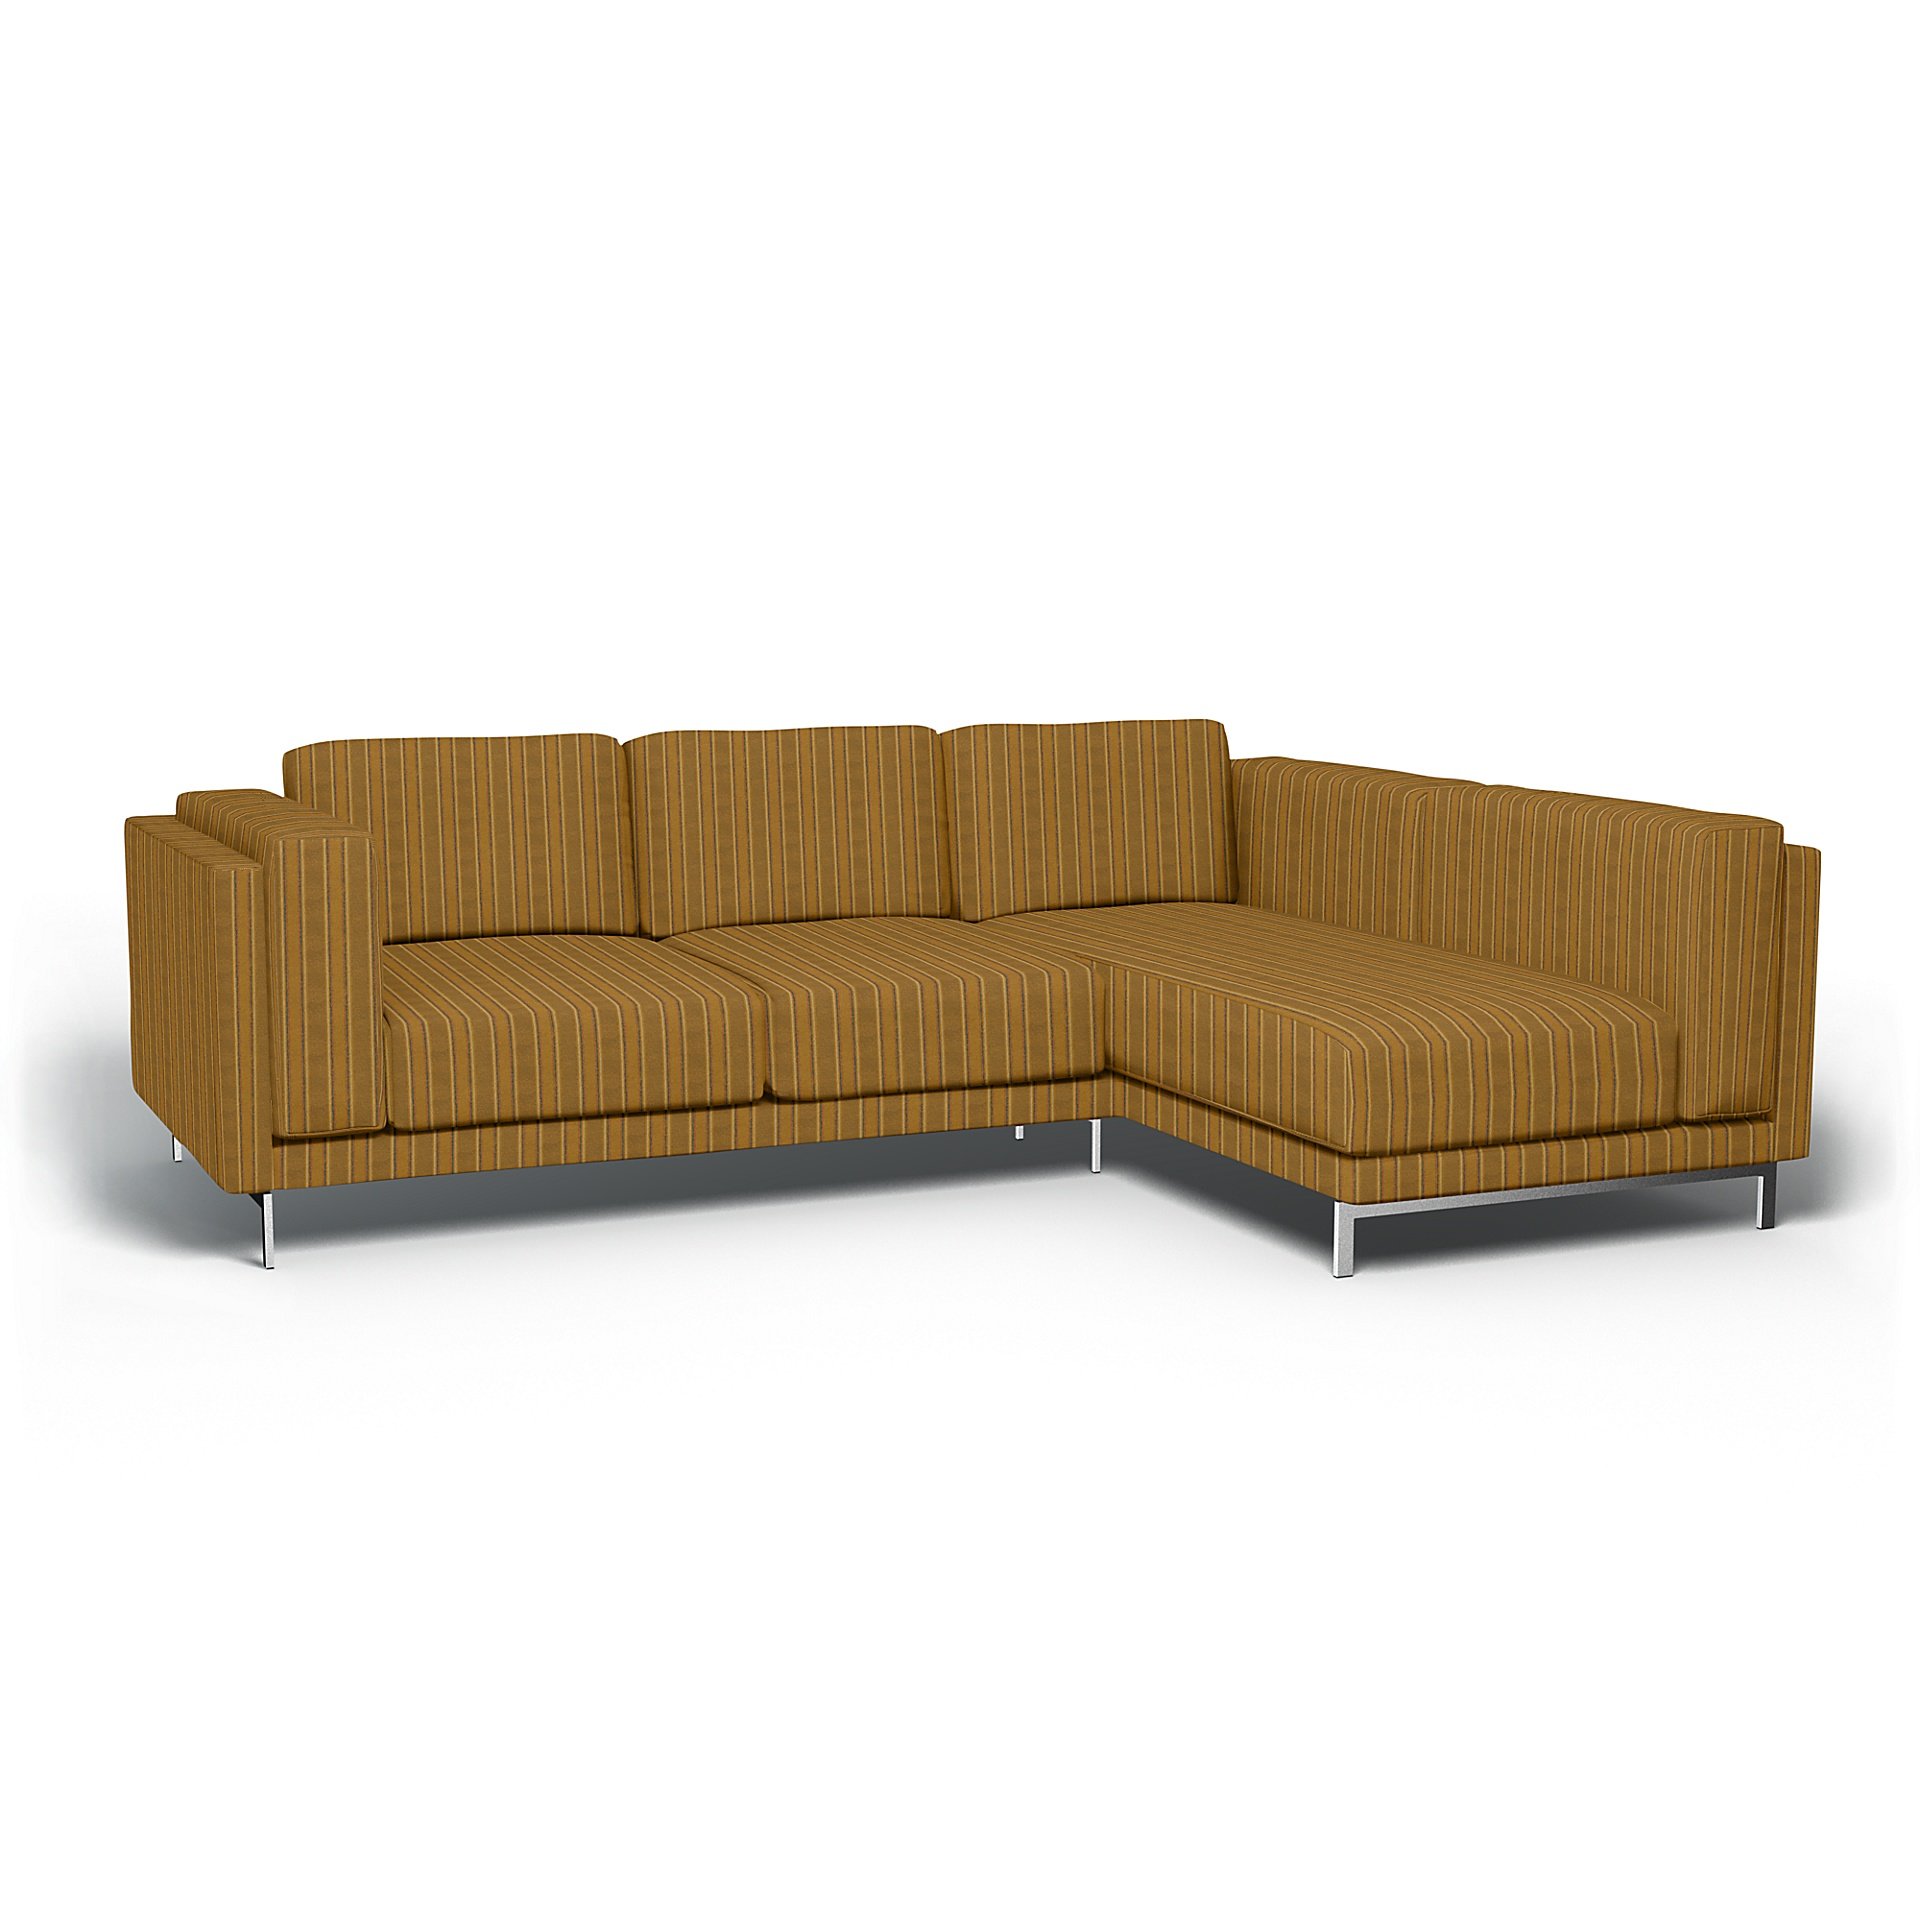 IKEA - Nockeby 3 Seat Sofa with Right Chaise Cover, Mustard Stripe, Cotton - Bemz